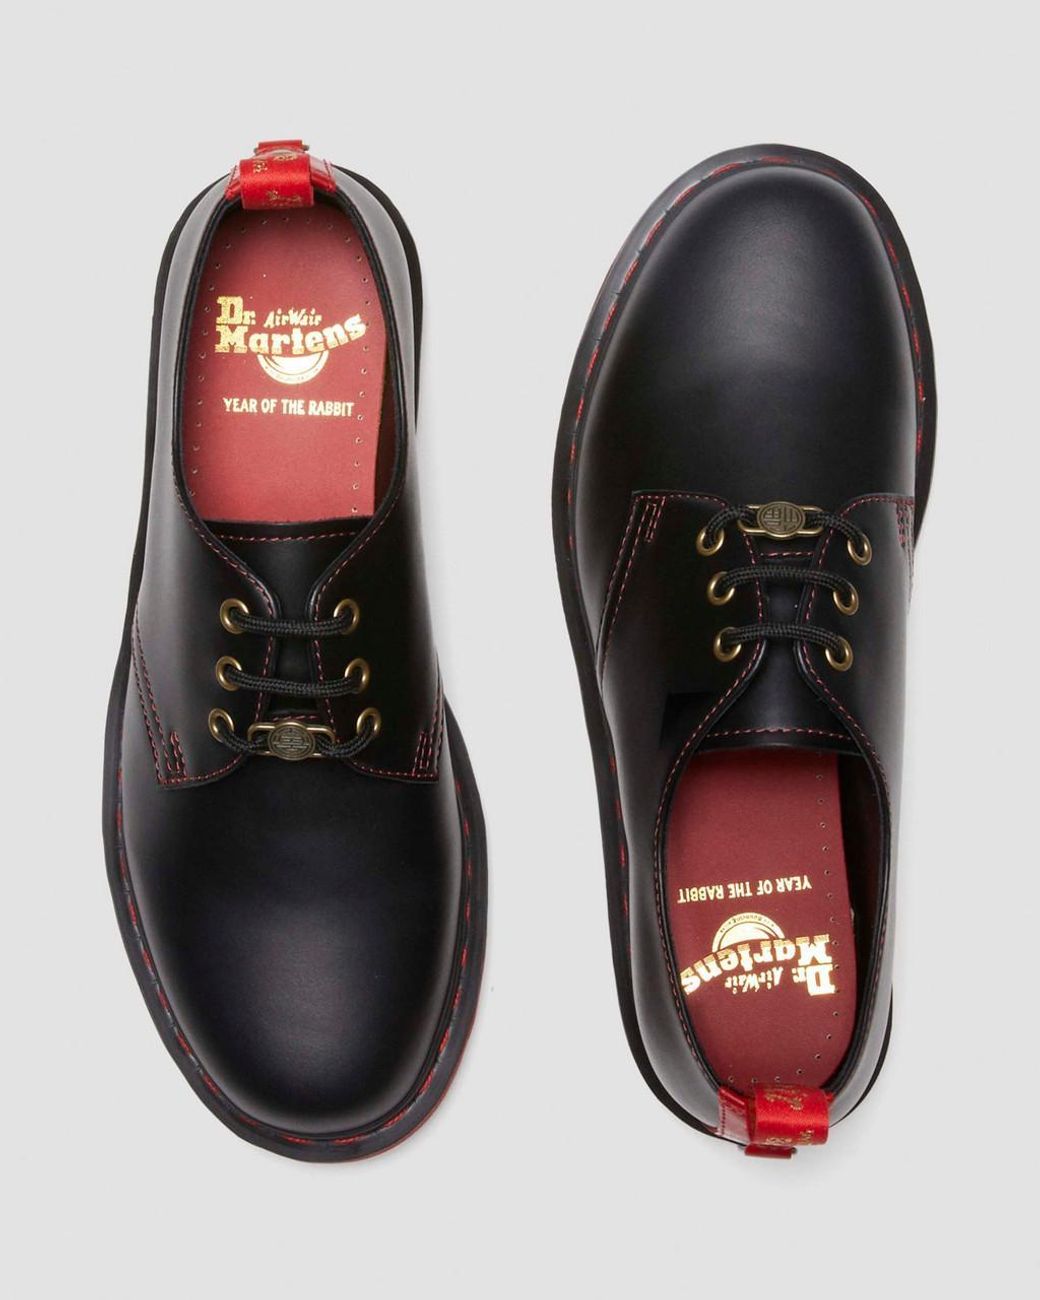 havik Pogo stick sprong tand Dr. Martens 1461 Year Of The Rabbit Leather Oxford Shoes in Red | Lyst